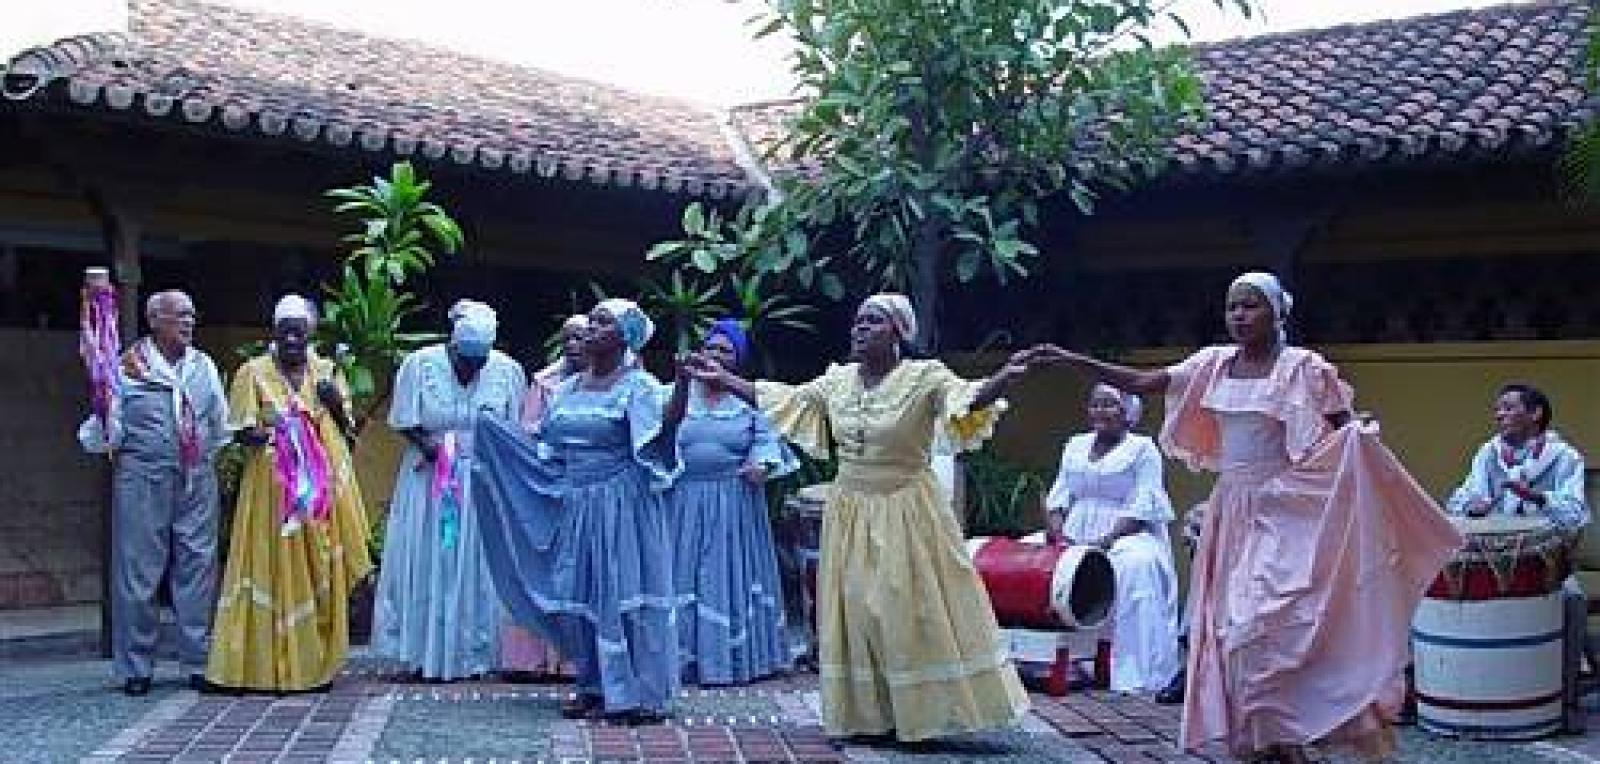 The French tumba in Cuban culture